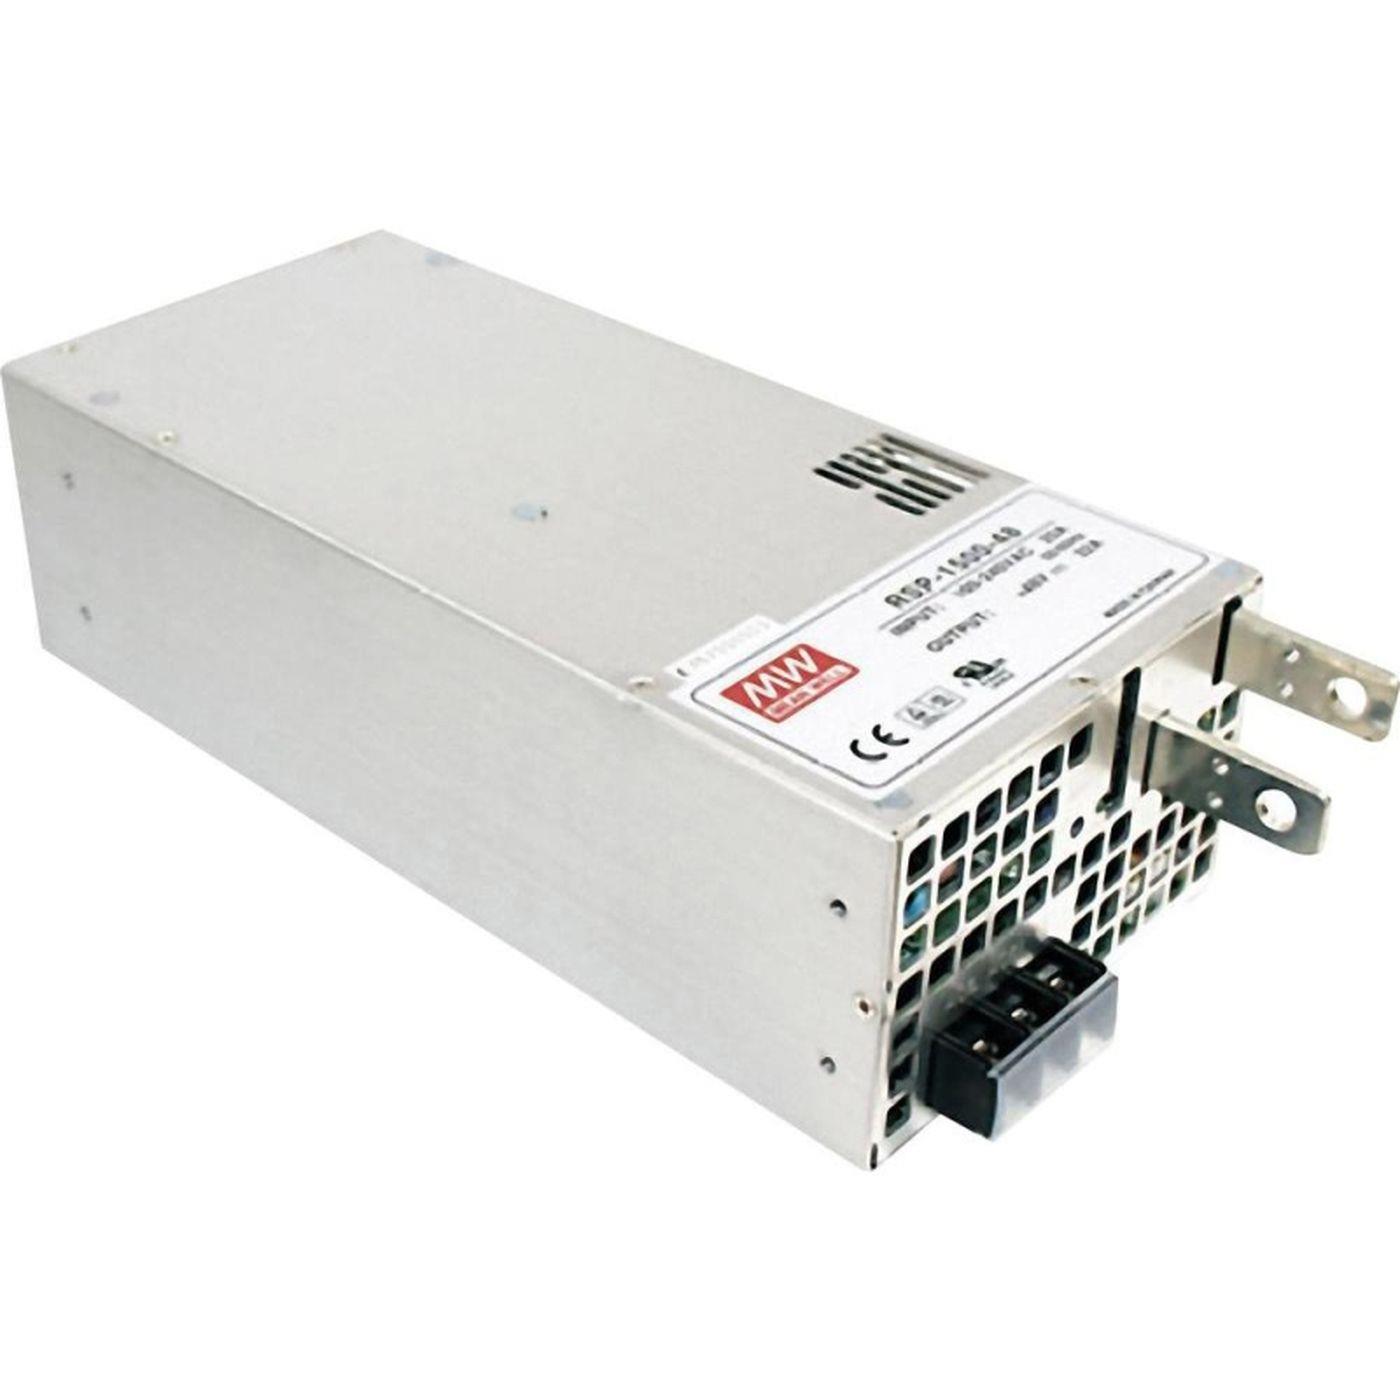 RSP-1500-5 1200W 5V 240A Industrial power supply